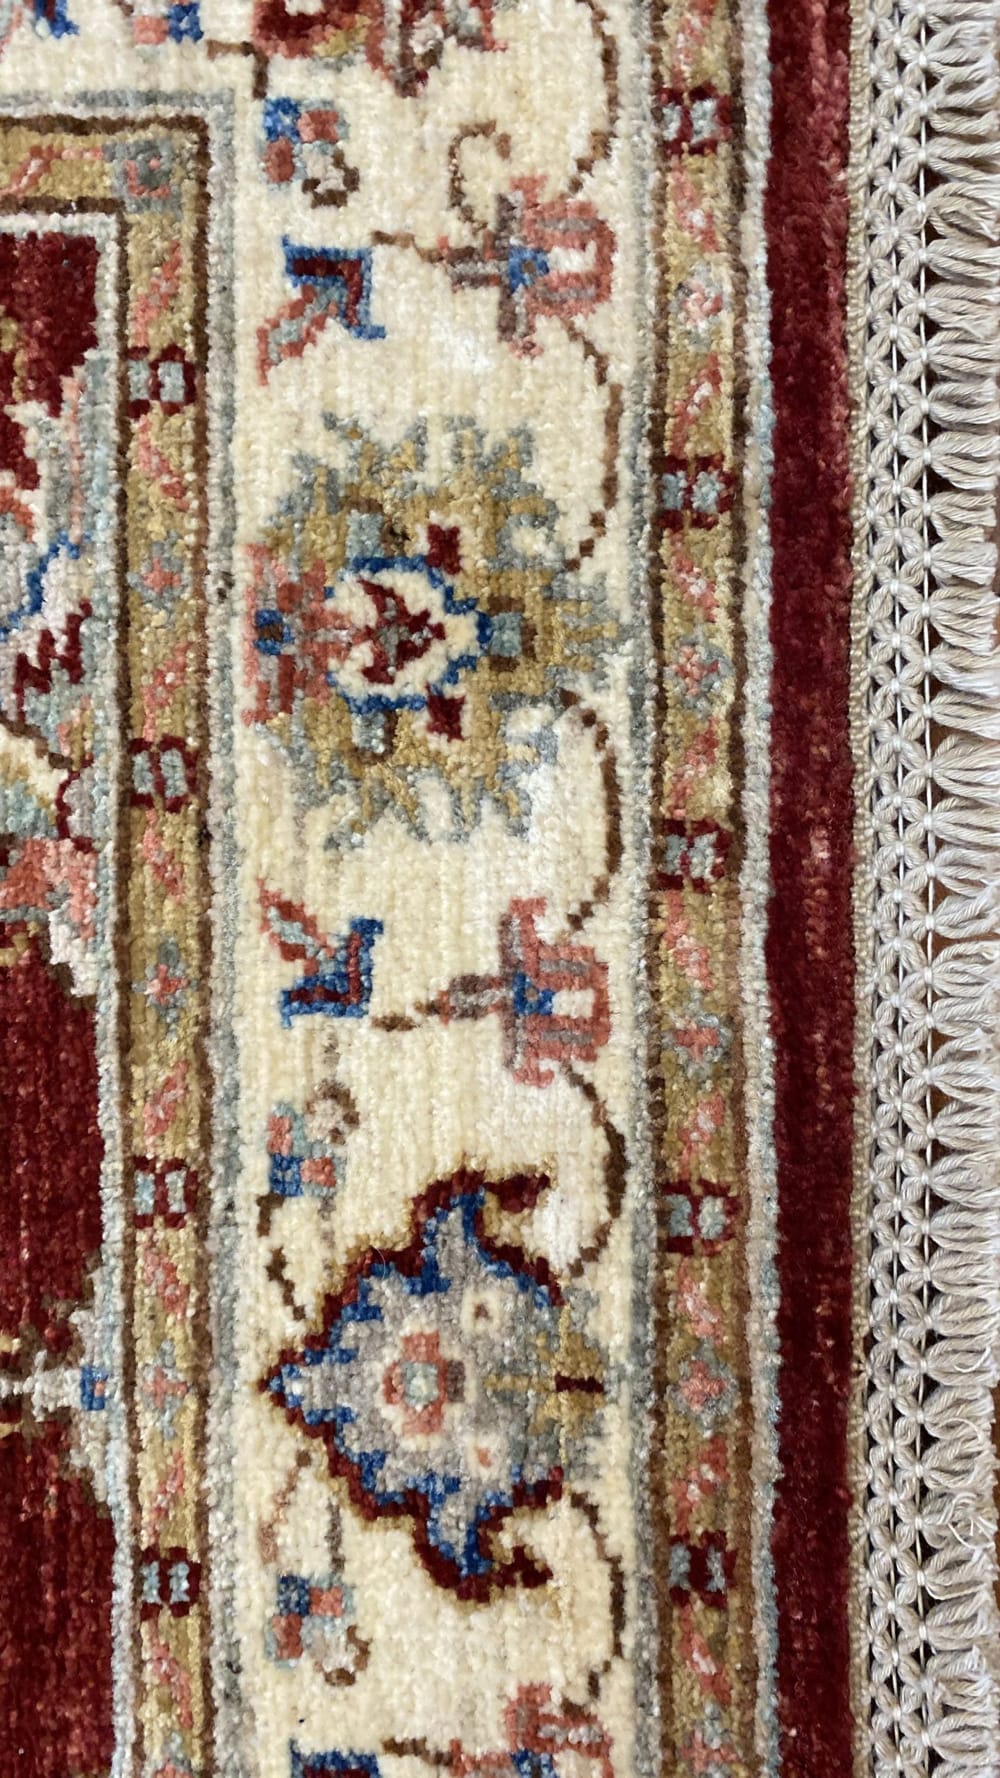 Rug# 24983, Afghan Turkaman weave, 19th c Sultanabad design, HSW, V.D, size 296x84 cm RRP $2300, Special $900 (5)